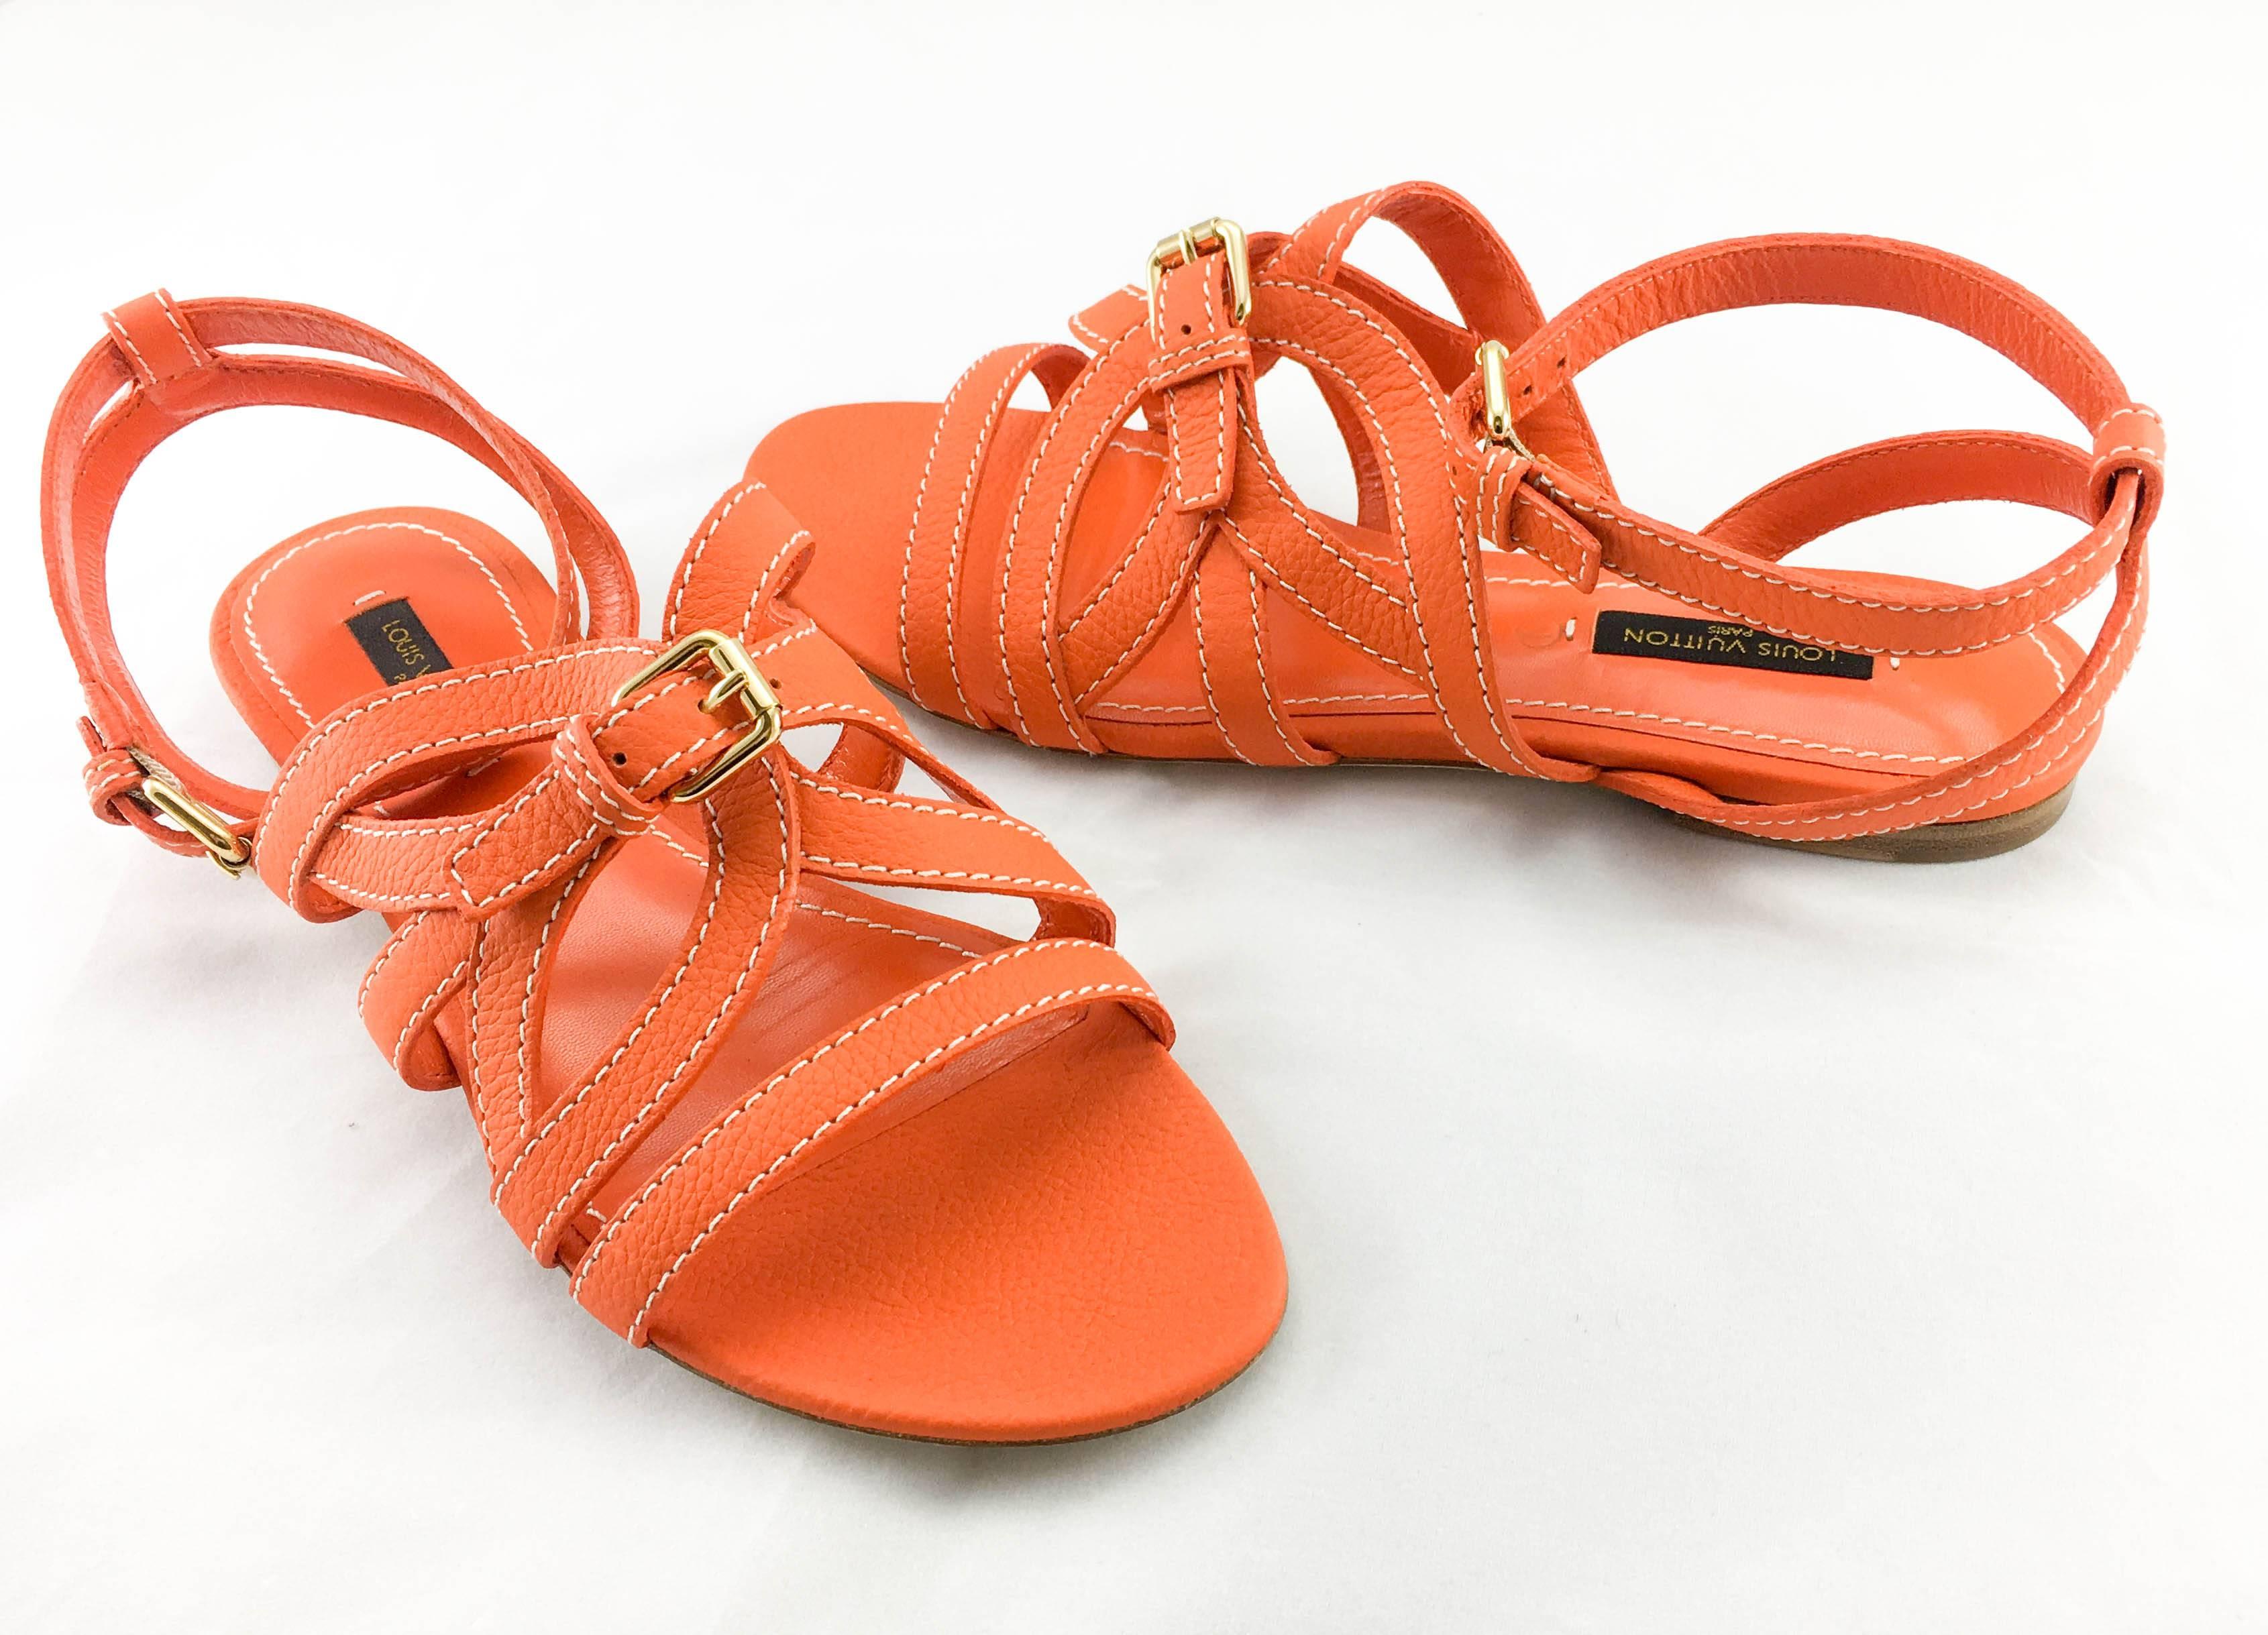 Louis Vuitton Orange Leather Flat Sandals In New Condition For Sale In London, Chelsea